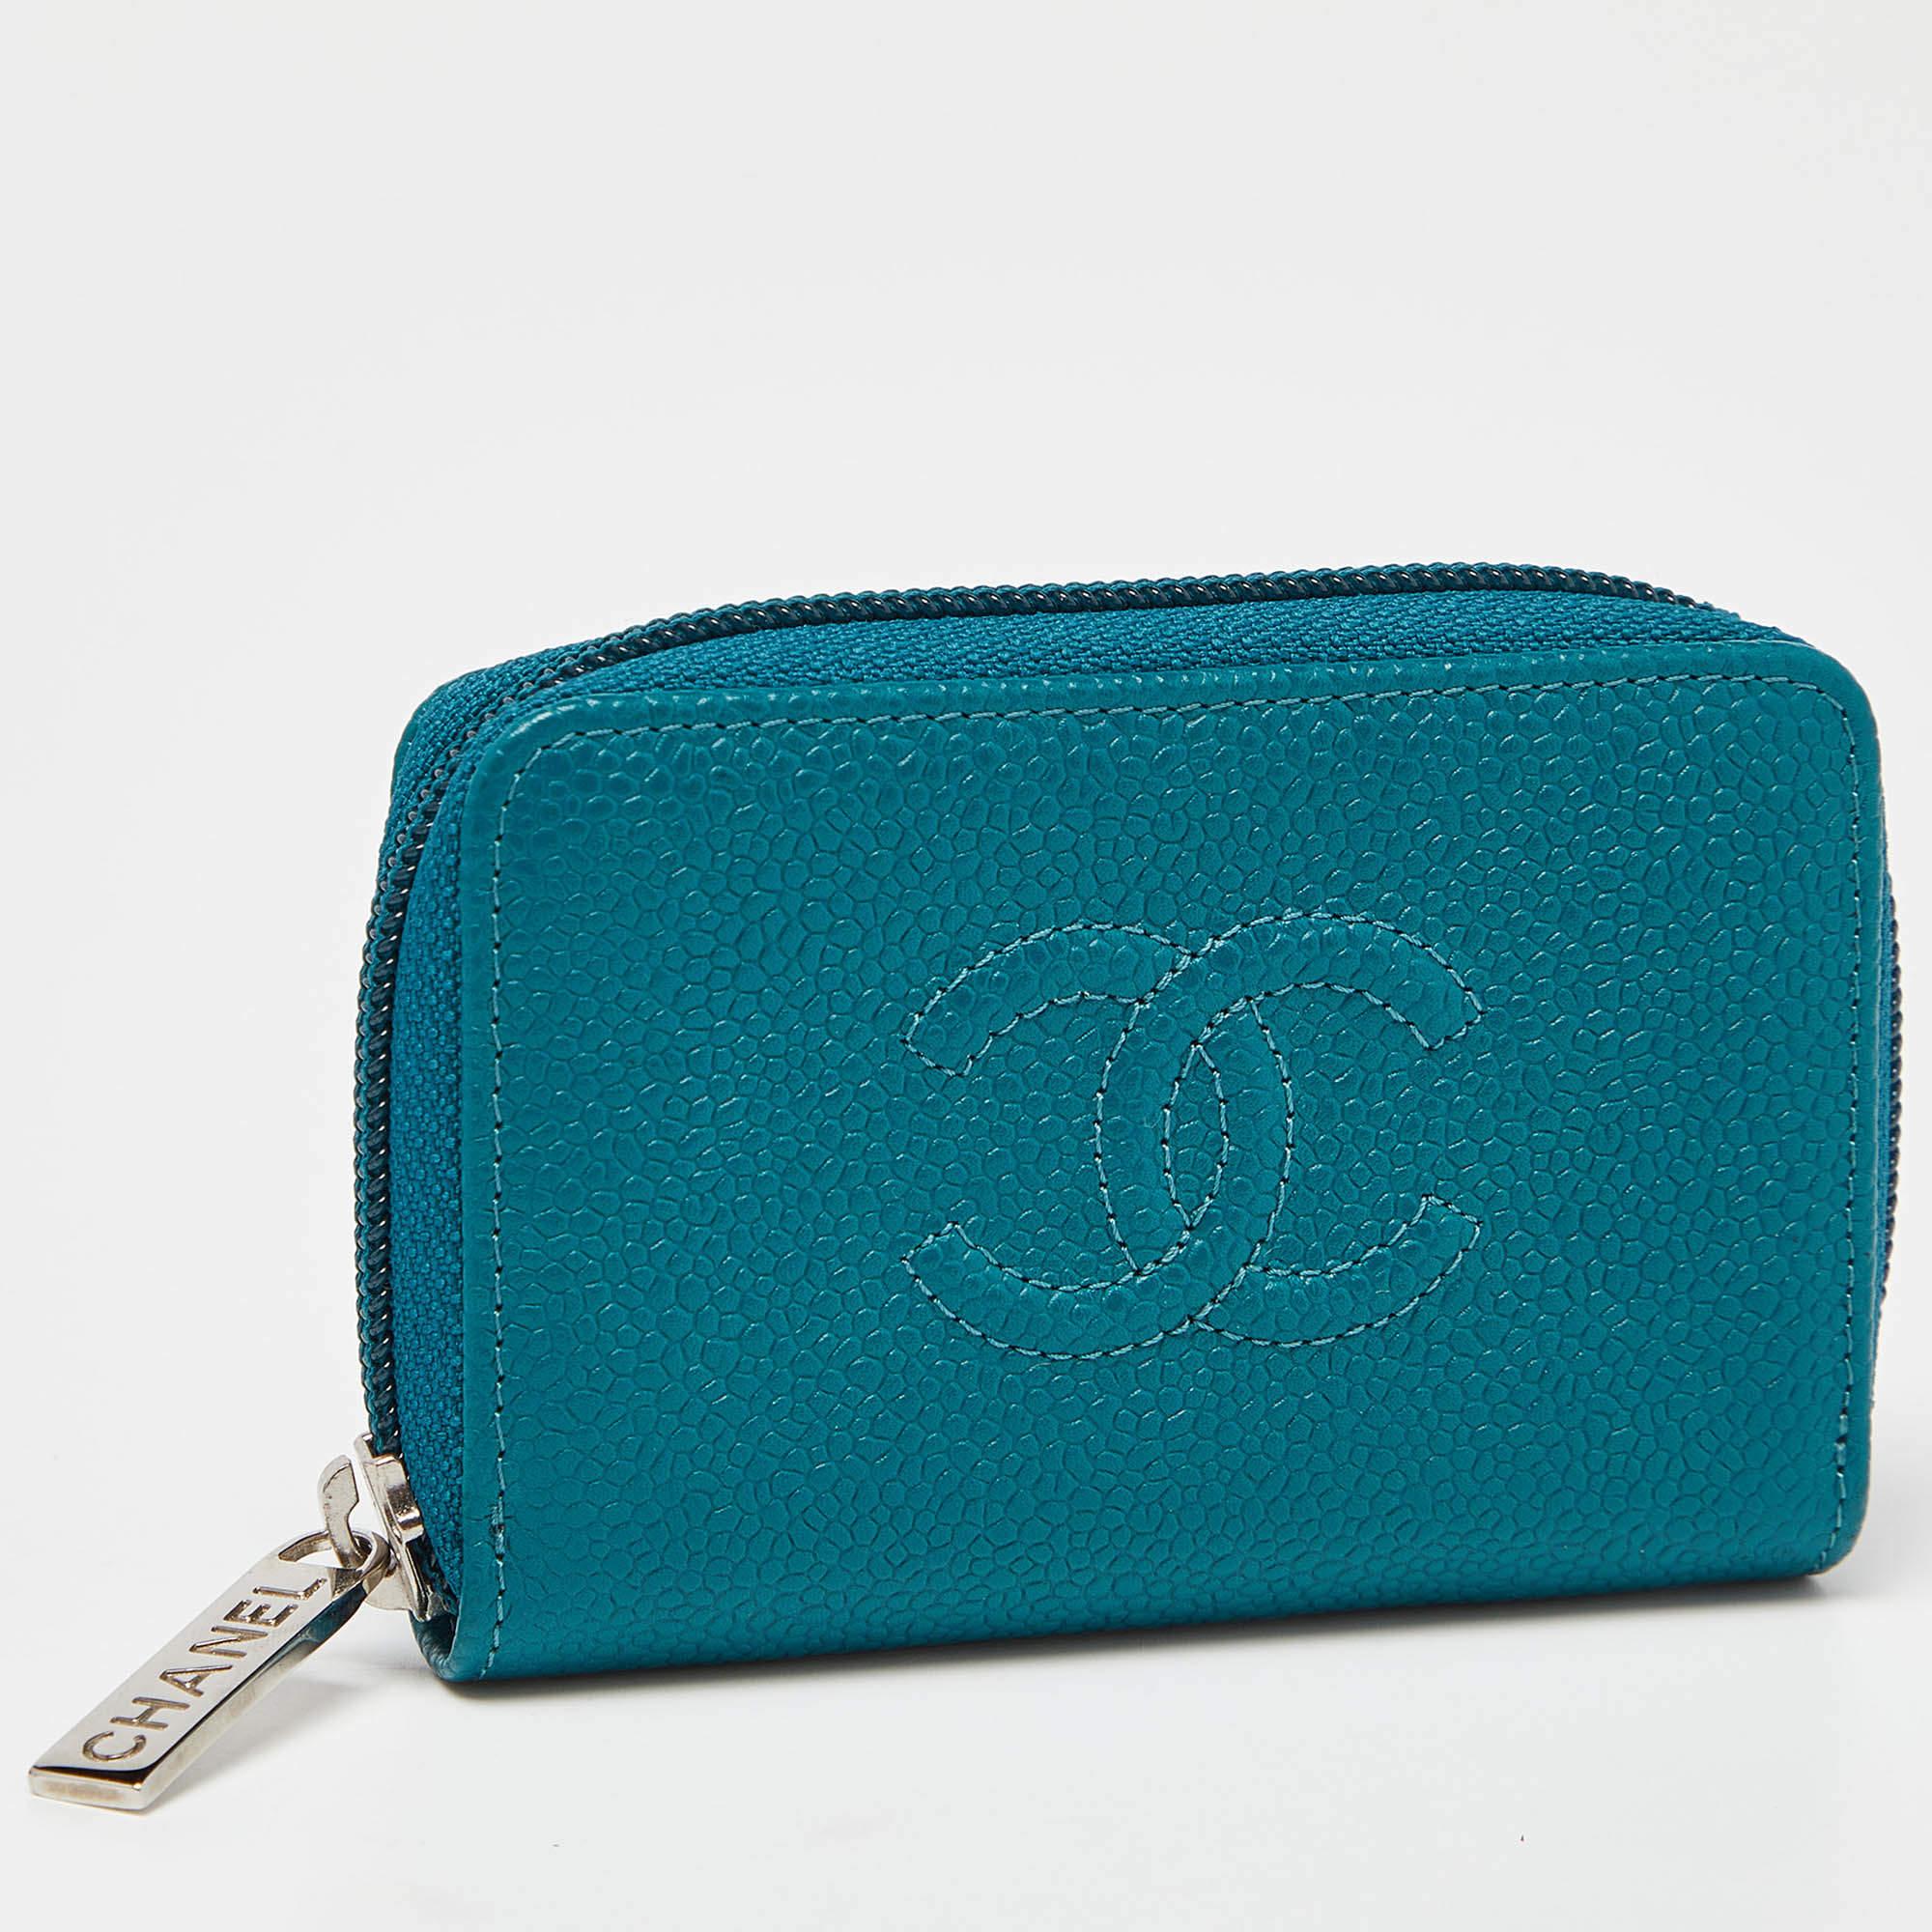 Crafted using Caviar leather, this Chanel coin purse will help carry your coins and other little essentials with ease. It comes in a lovely teal blue hue.

